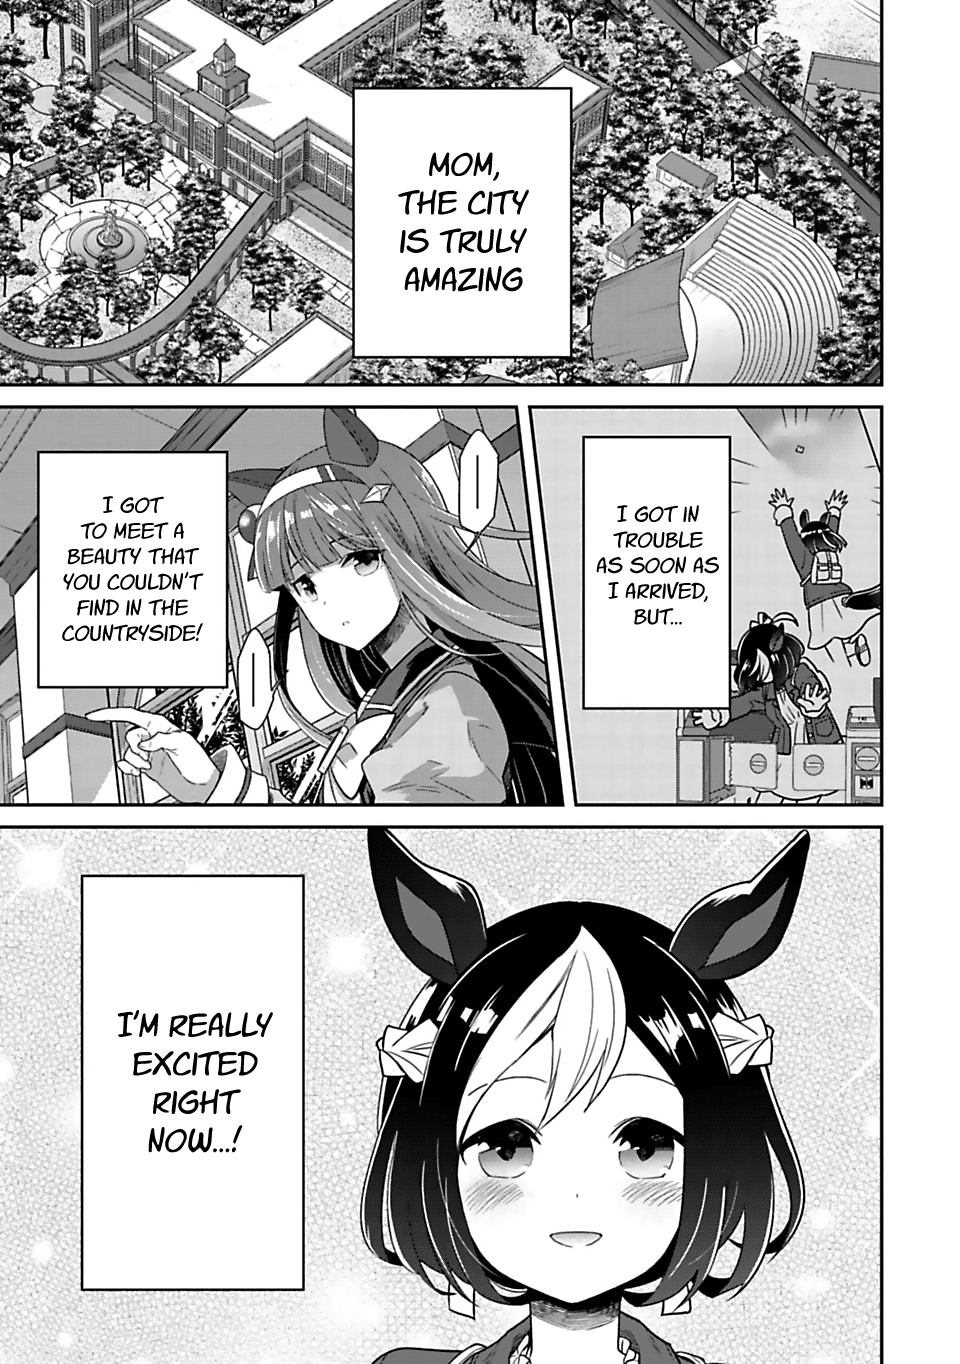 Starting Gate! Uma Musume Pretty Derby Vol.1 Chapter 2: Special Today! #02 - Picture 1